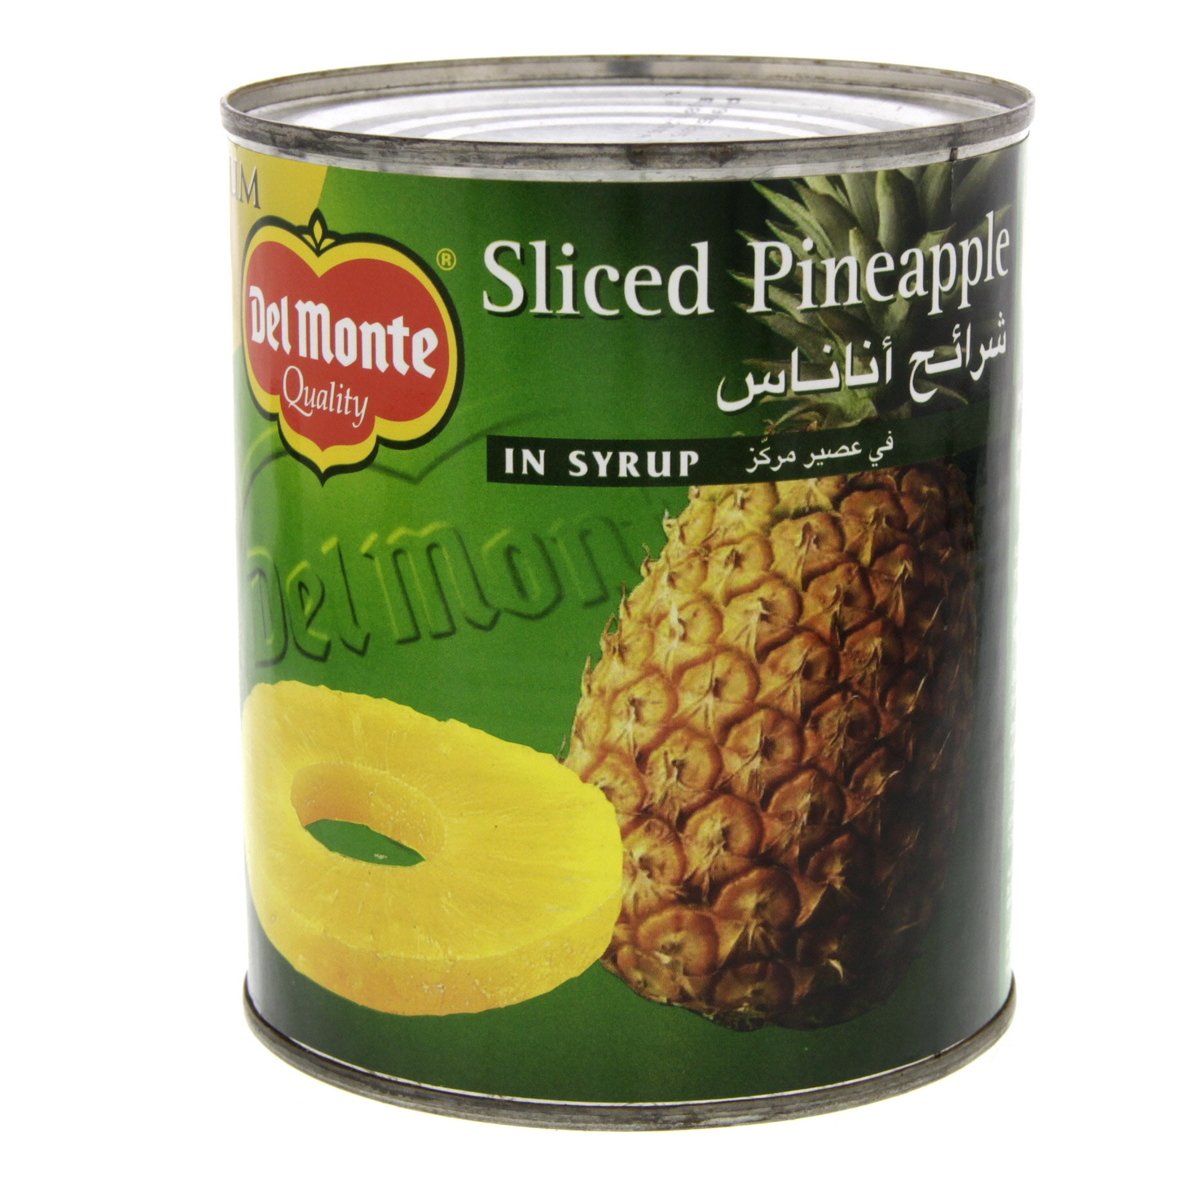 Delmonte Sliced Pineapple In Syrup 836g